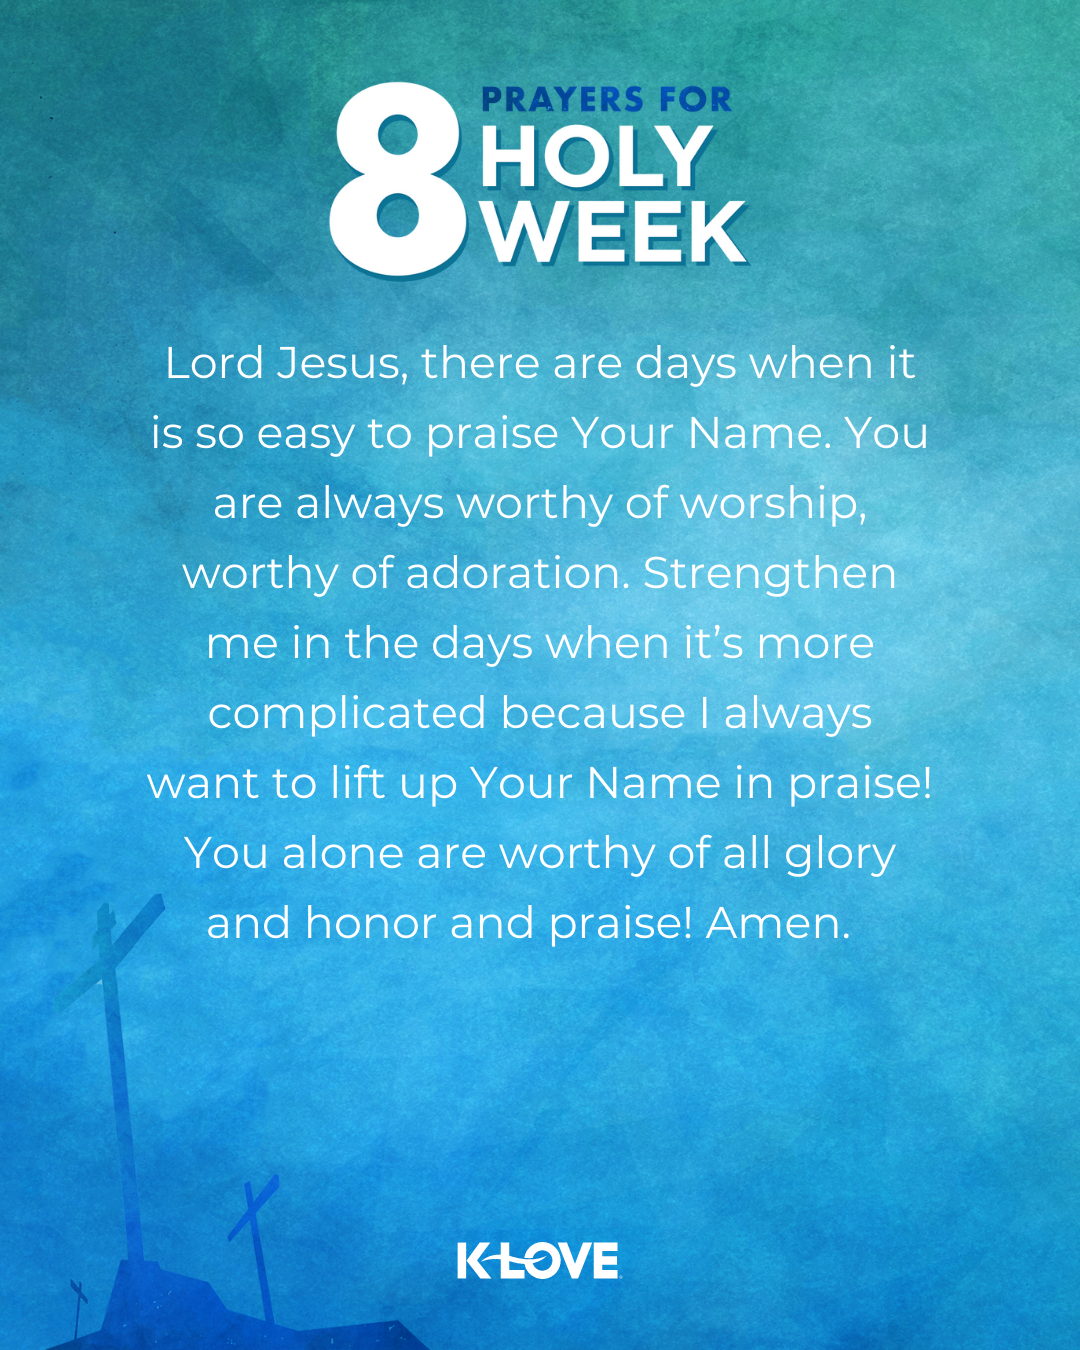 Lord Jesus, there are days when it is so easy to praise Your Name. You are always worthy of worship, worthy of adoration. Strengthen me in the days when it’s more complicated because I always want to lift up Your Name in praise! You alone are worthy of all glory and honor and praise! Amen. 